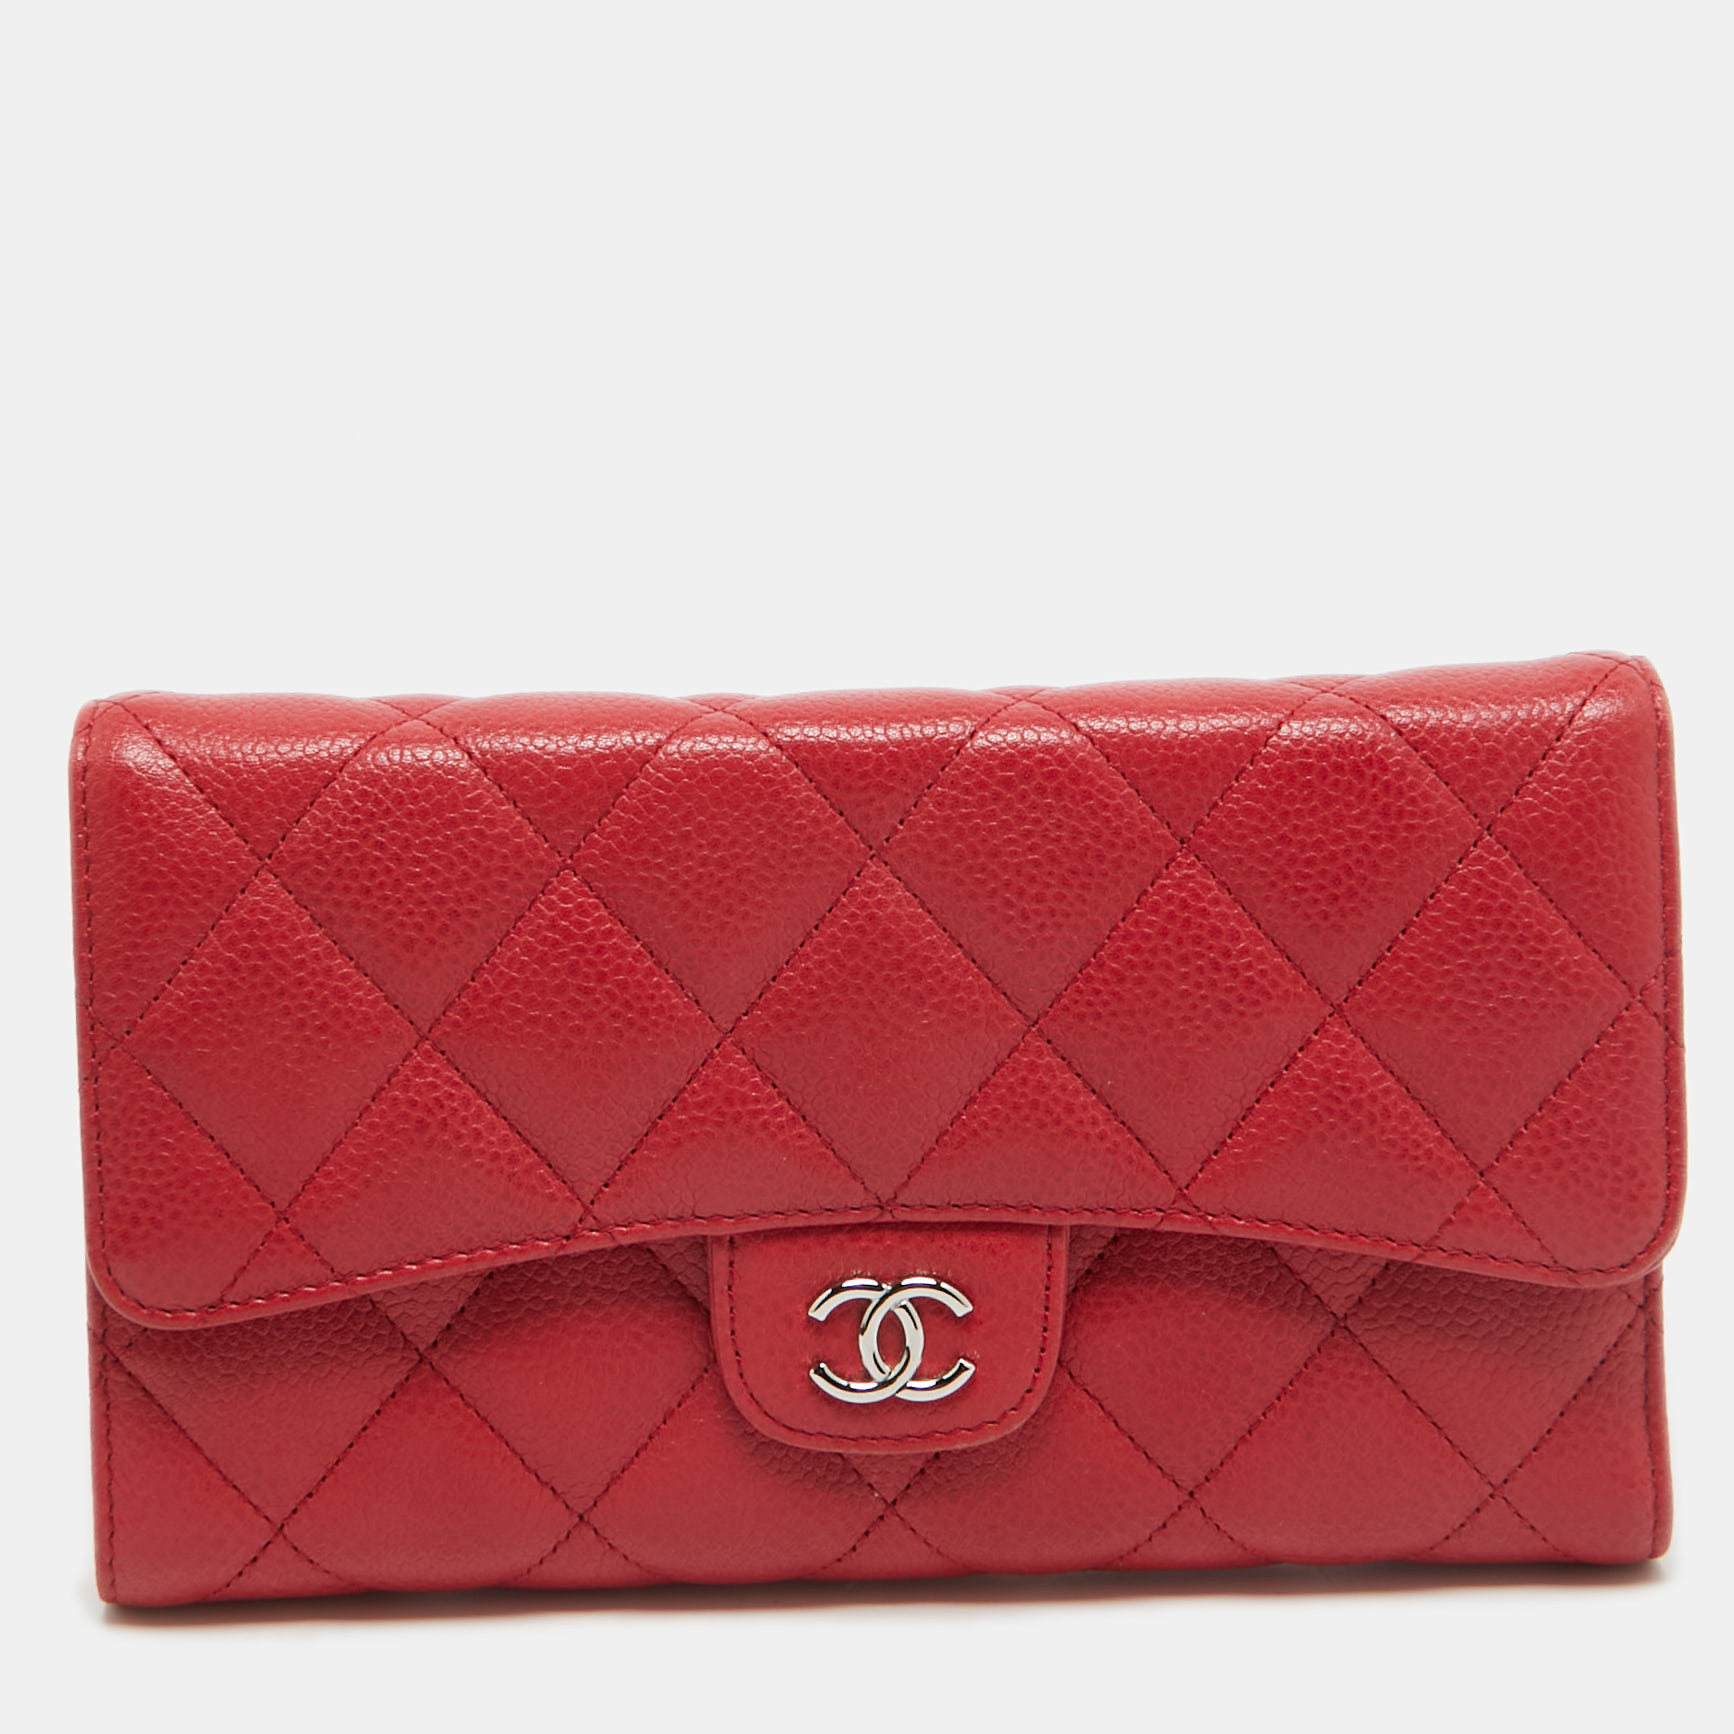 This Chanel wallet is conveniently designed for everyday use. Crafted from quilted Caviar leather the wallet opens to reveal slip compartments and multiple card slots for you to neatly arrange your cash and cards. This stylish piece is complete with the famous interlocking CC on the front flap.